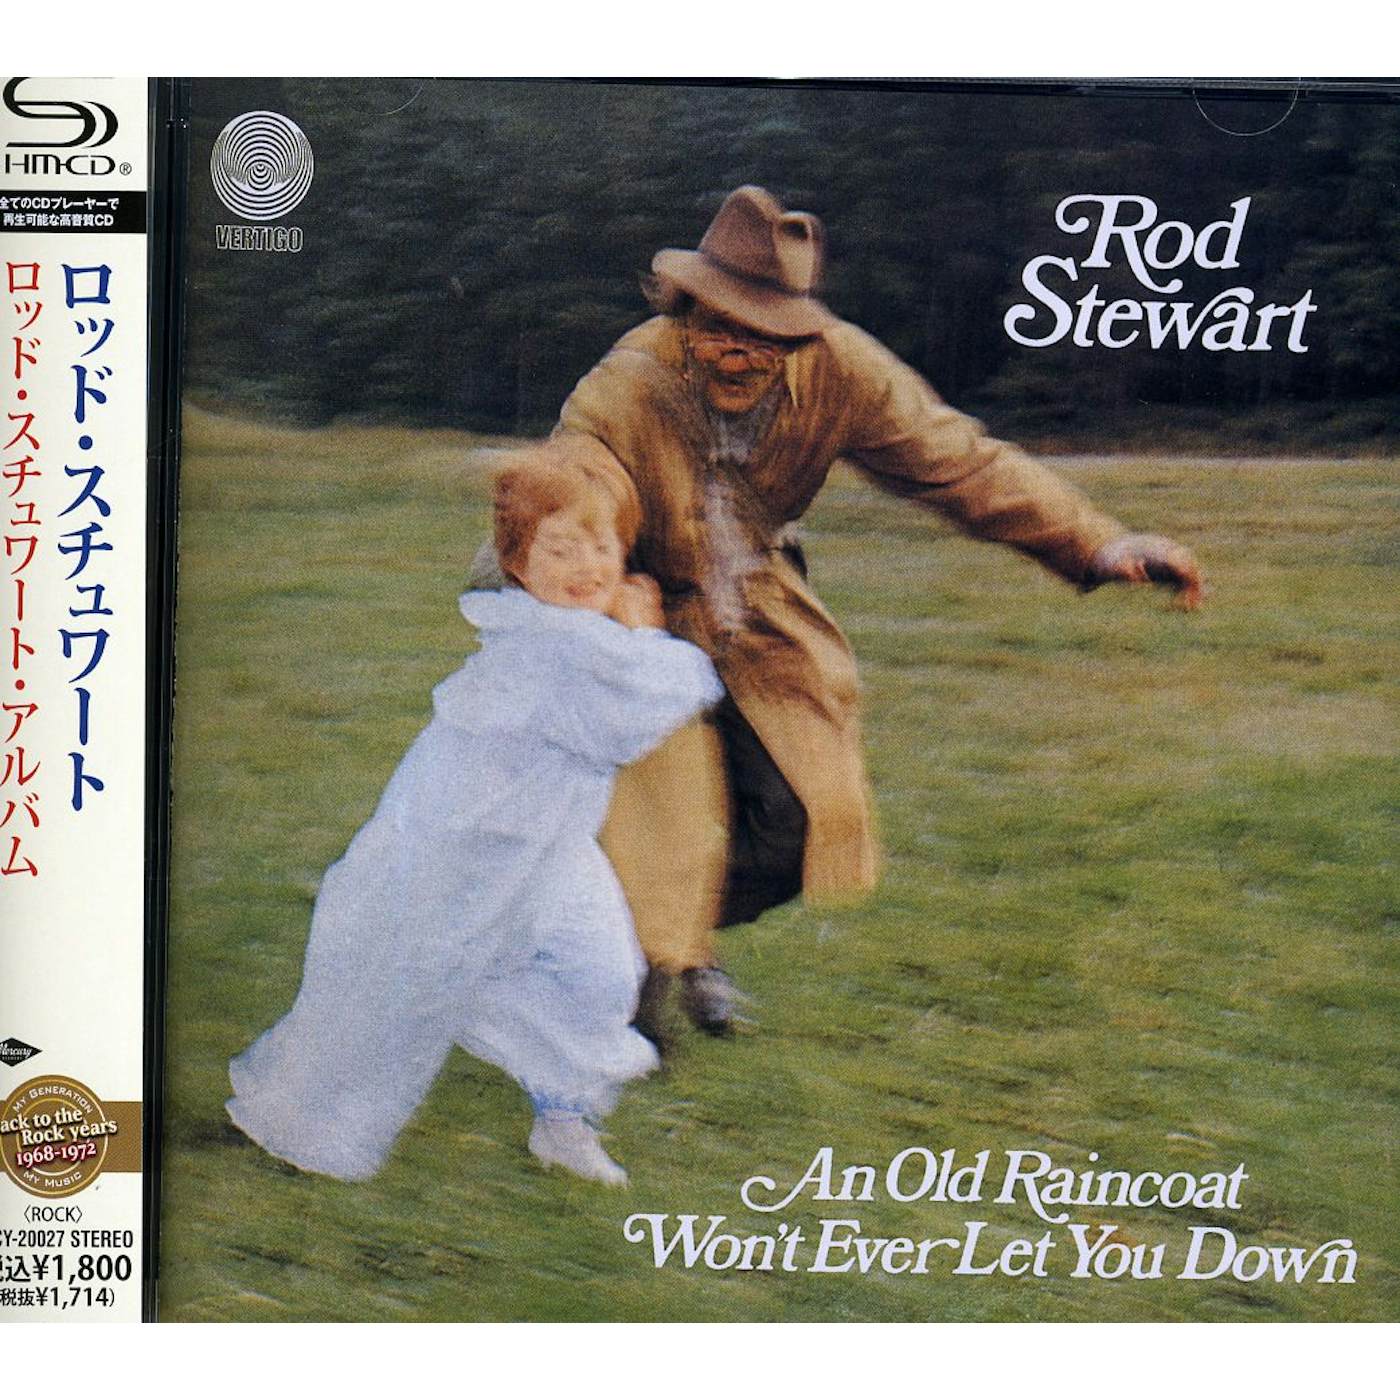 Rod Stewart AN OLD RAINCOAT WON'T EVER LET YOU DOWN CD